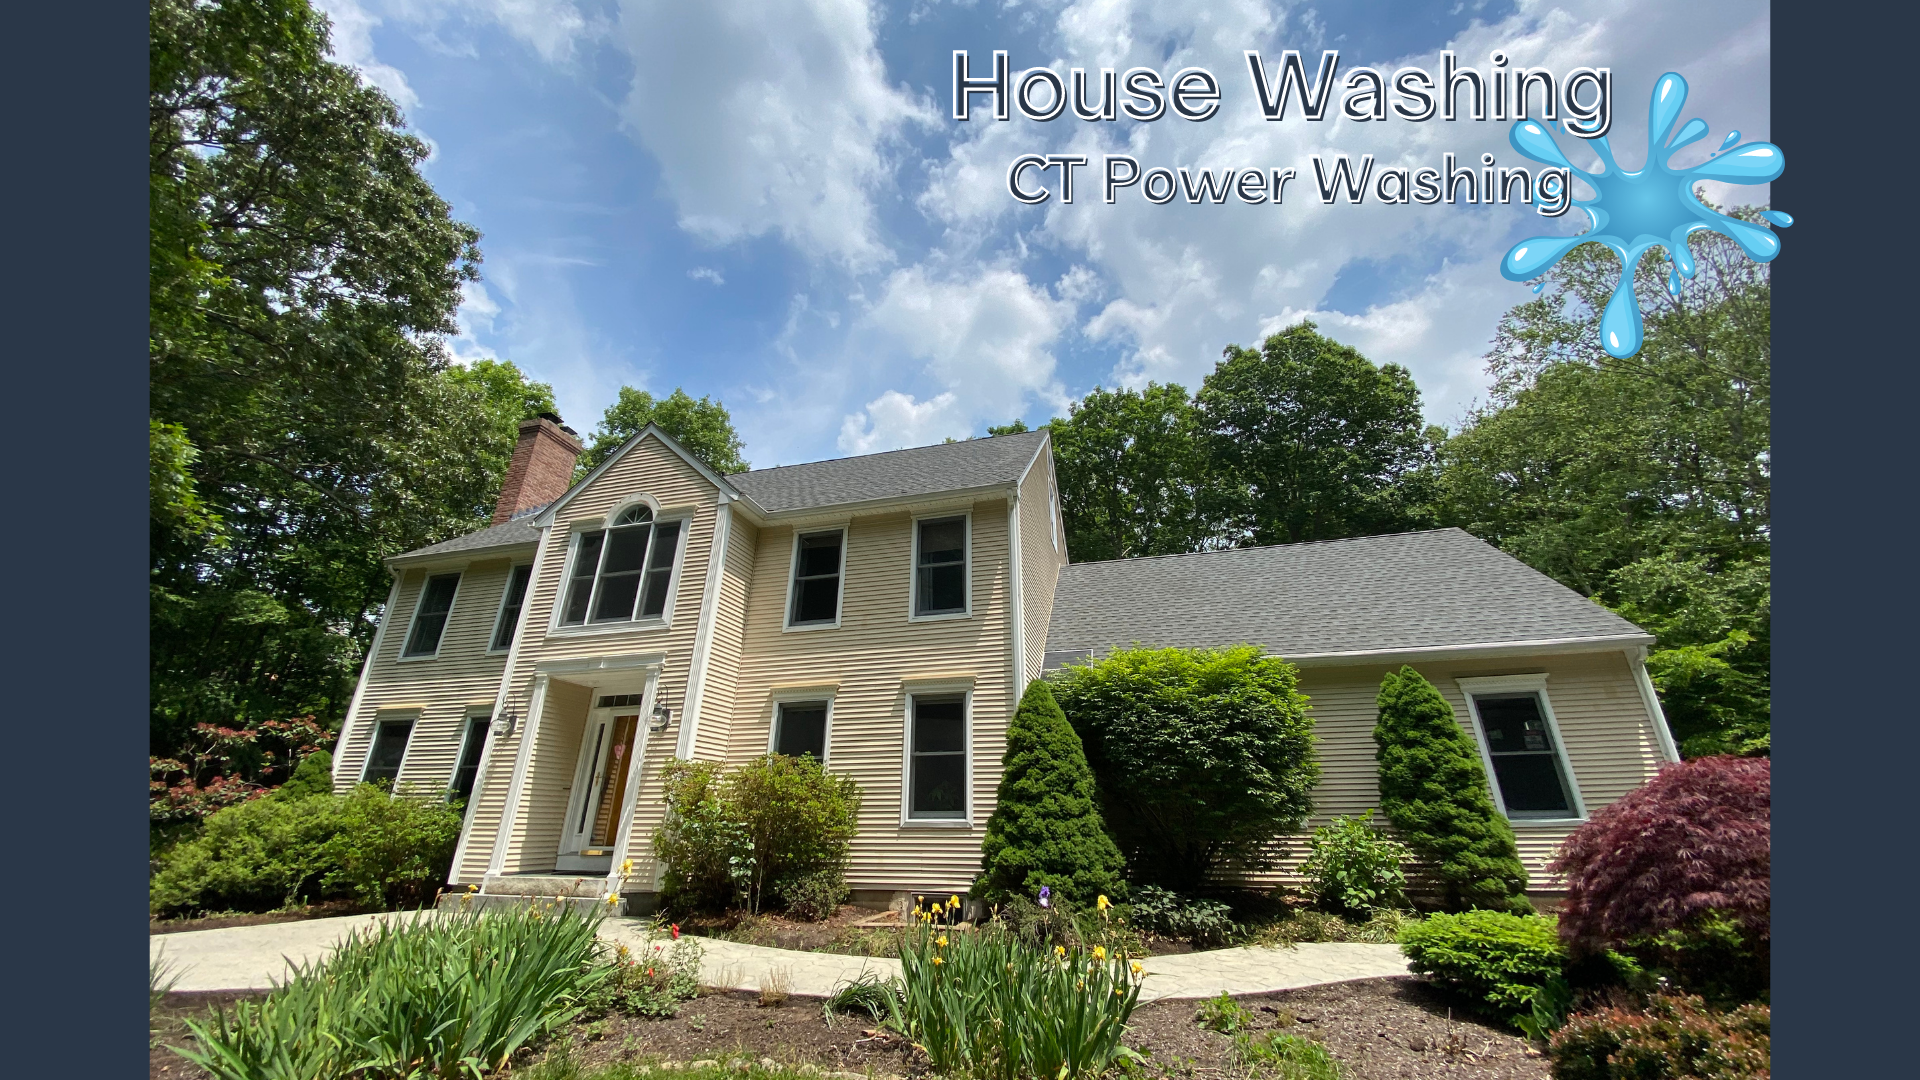 House Washing Service Connecticut